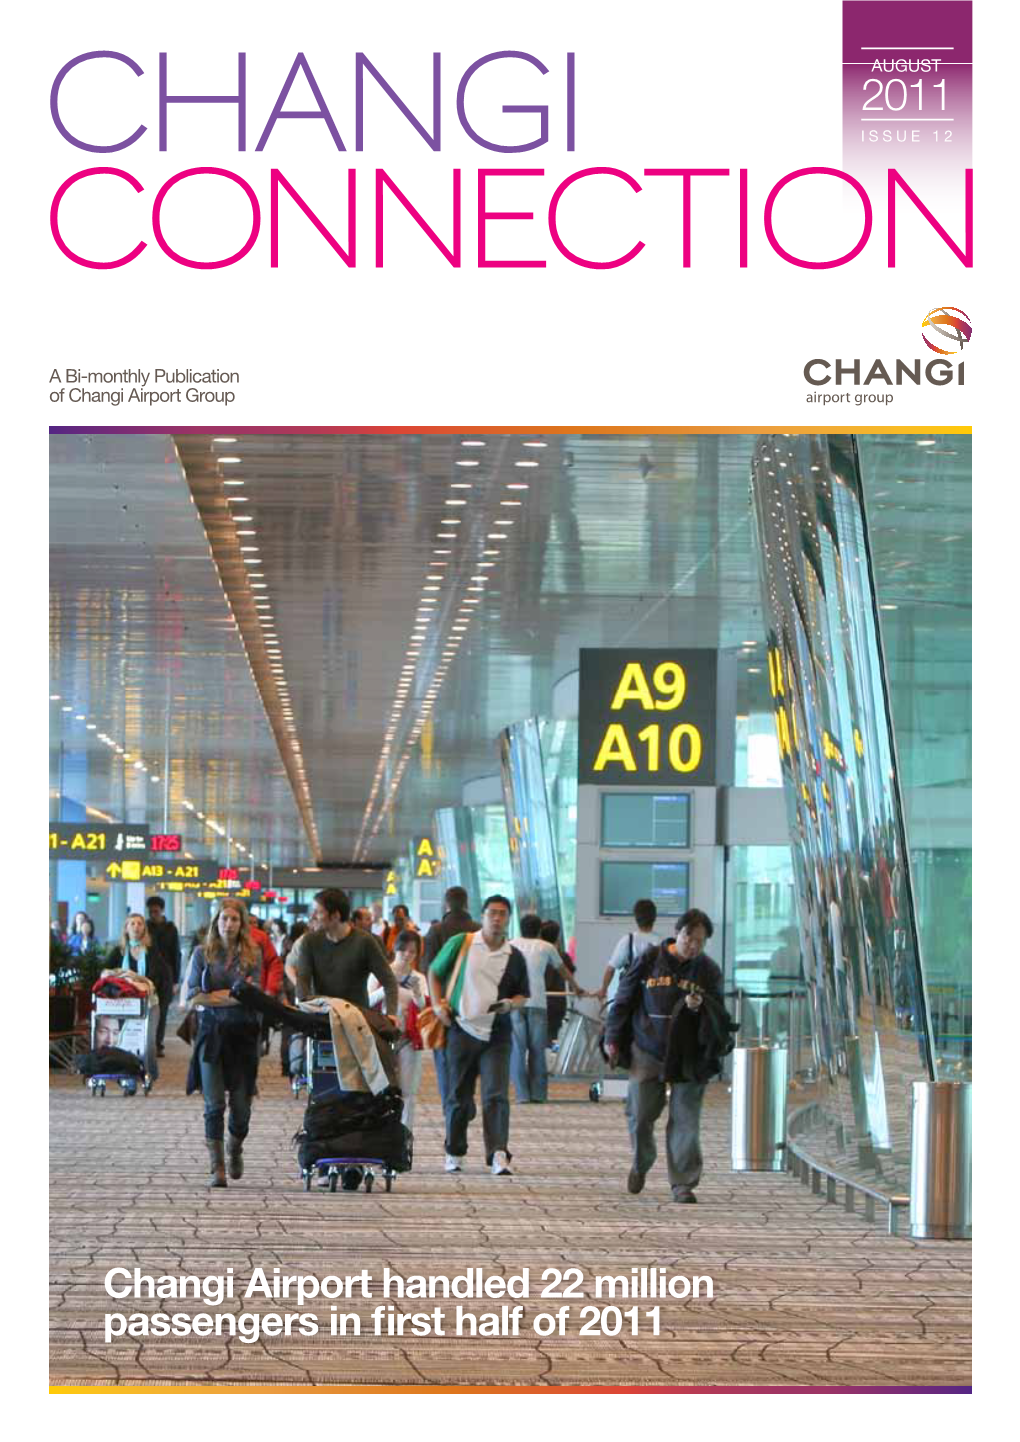 Changi Airport Handled 22 Million Passengers in First Half of 2011 PROFILE